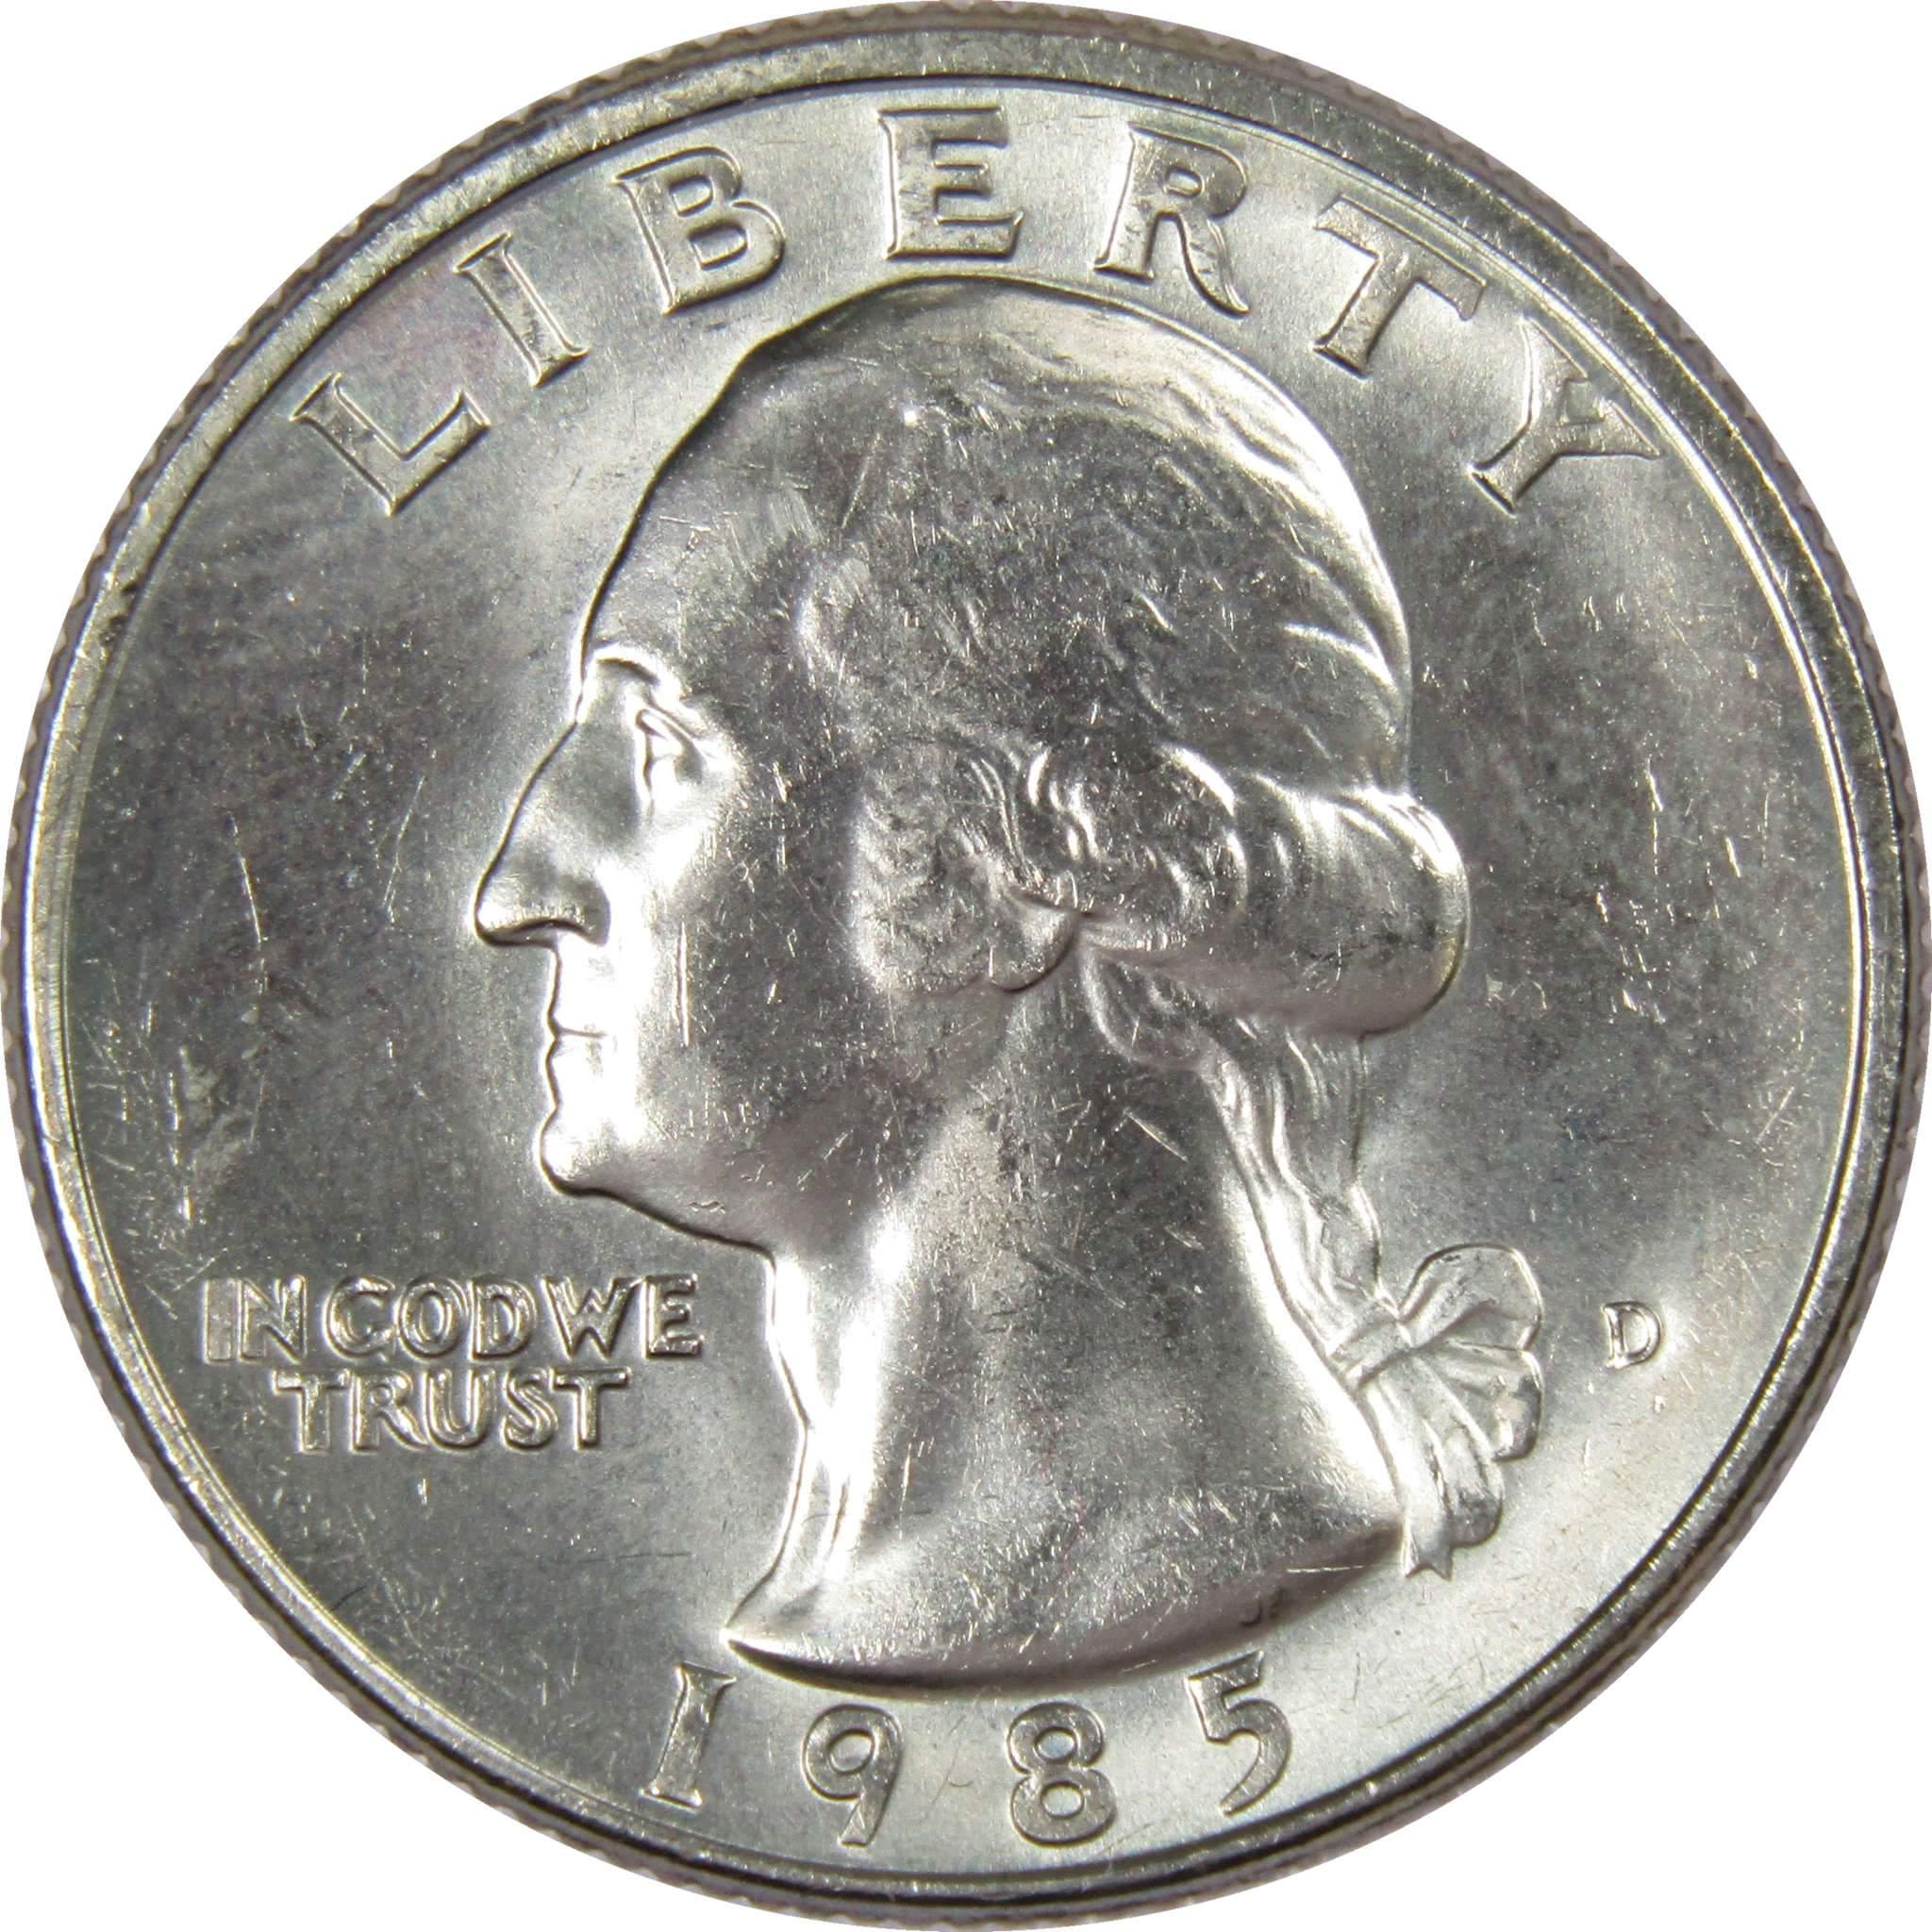 1985 D Washington Quarter BU Uncirculated Mint State 25c US Coin Collectible